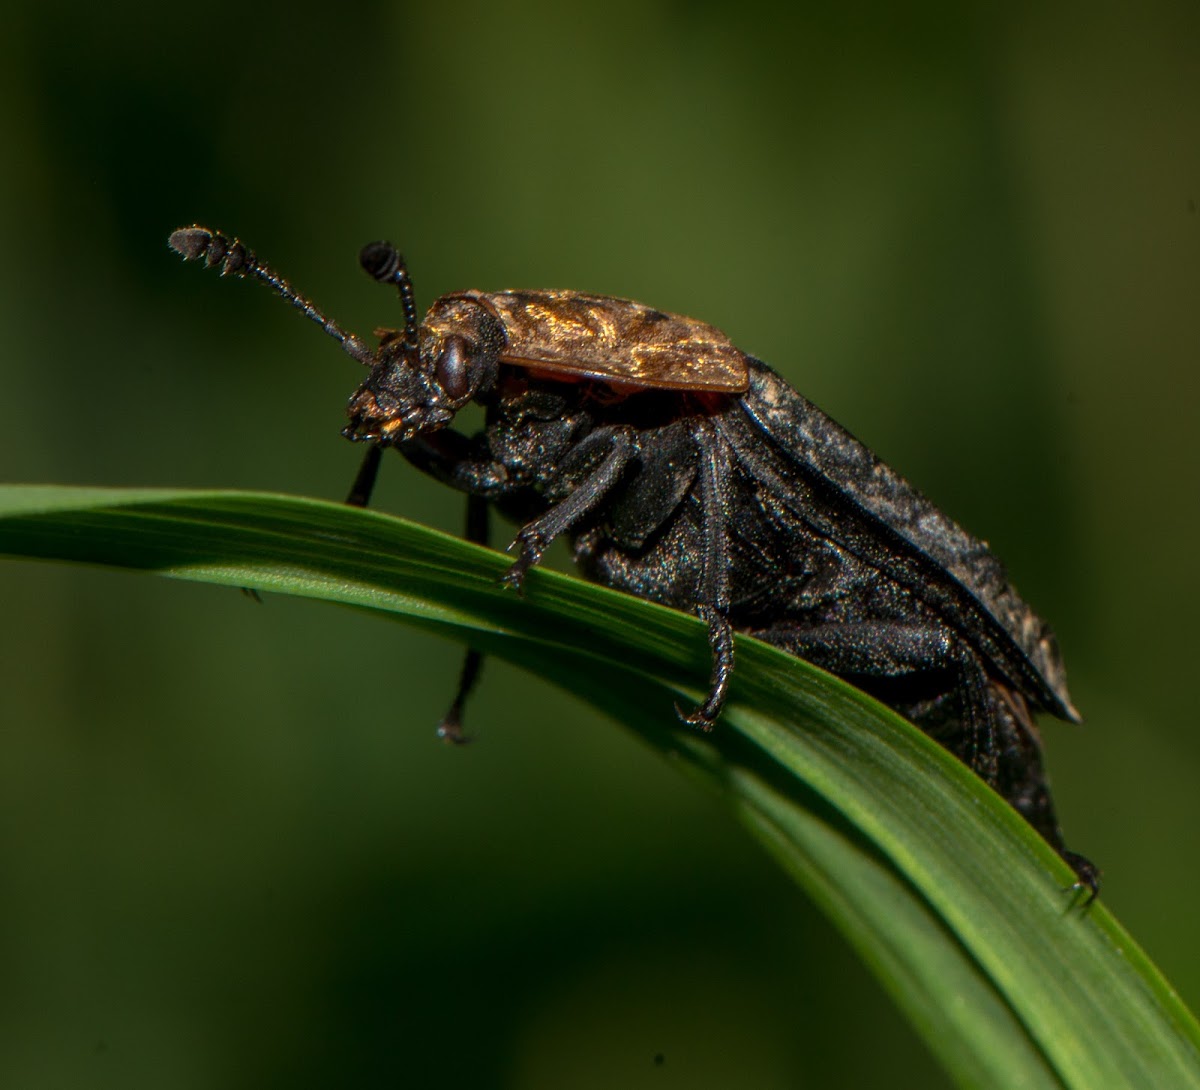 Red-breasted carrion beetle